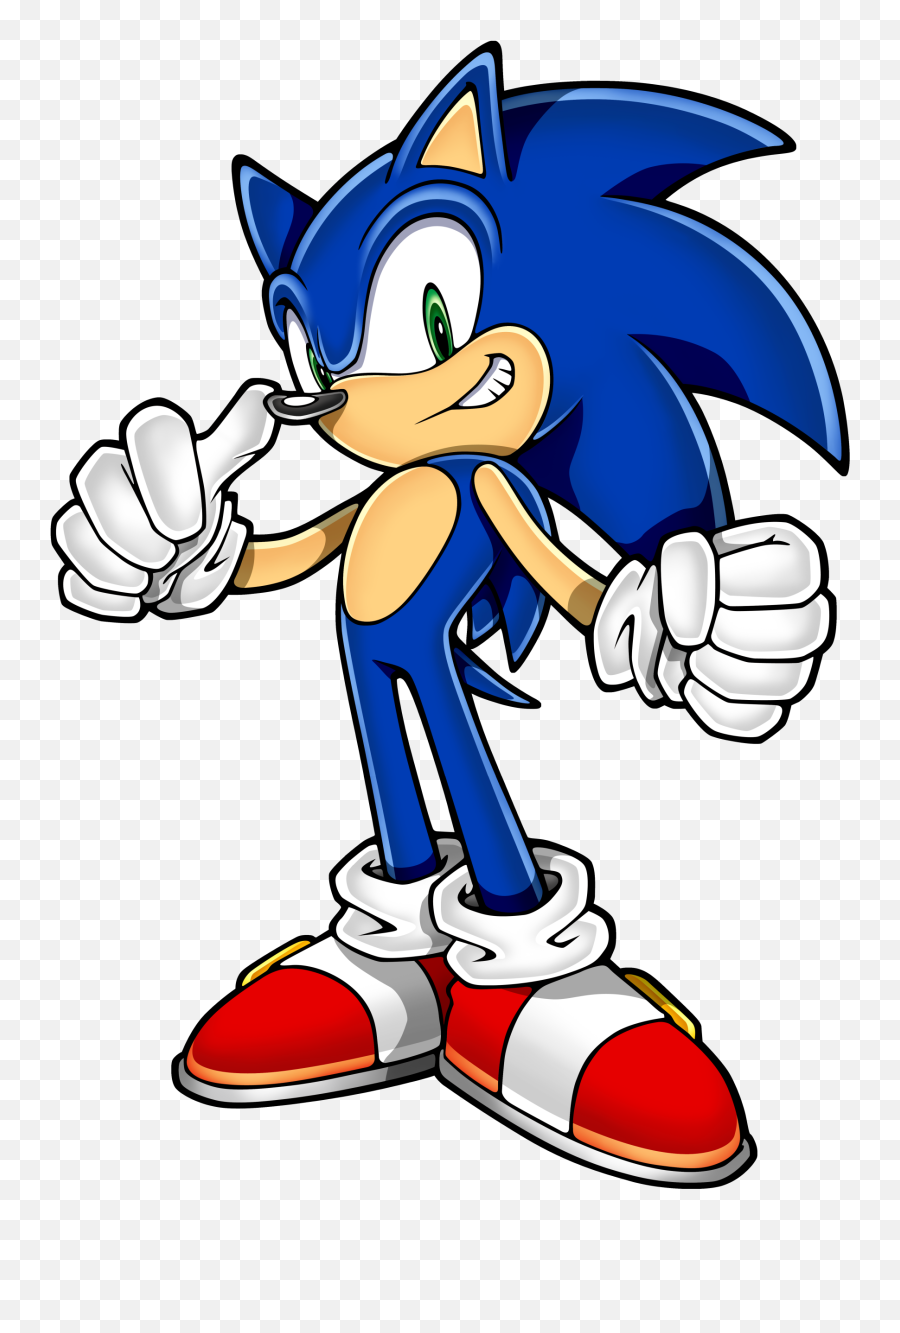 Why Is Sonic So Fast - Sonic The Hedgehog Png Emoji,Sanic Transparent